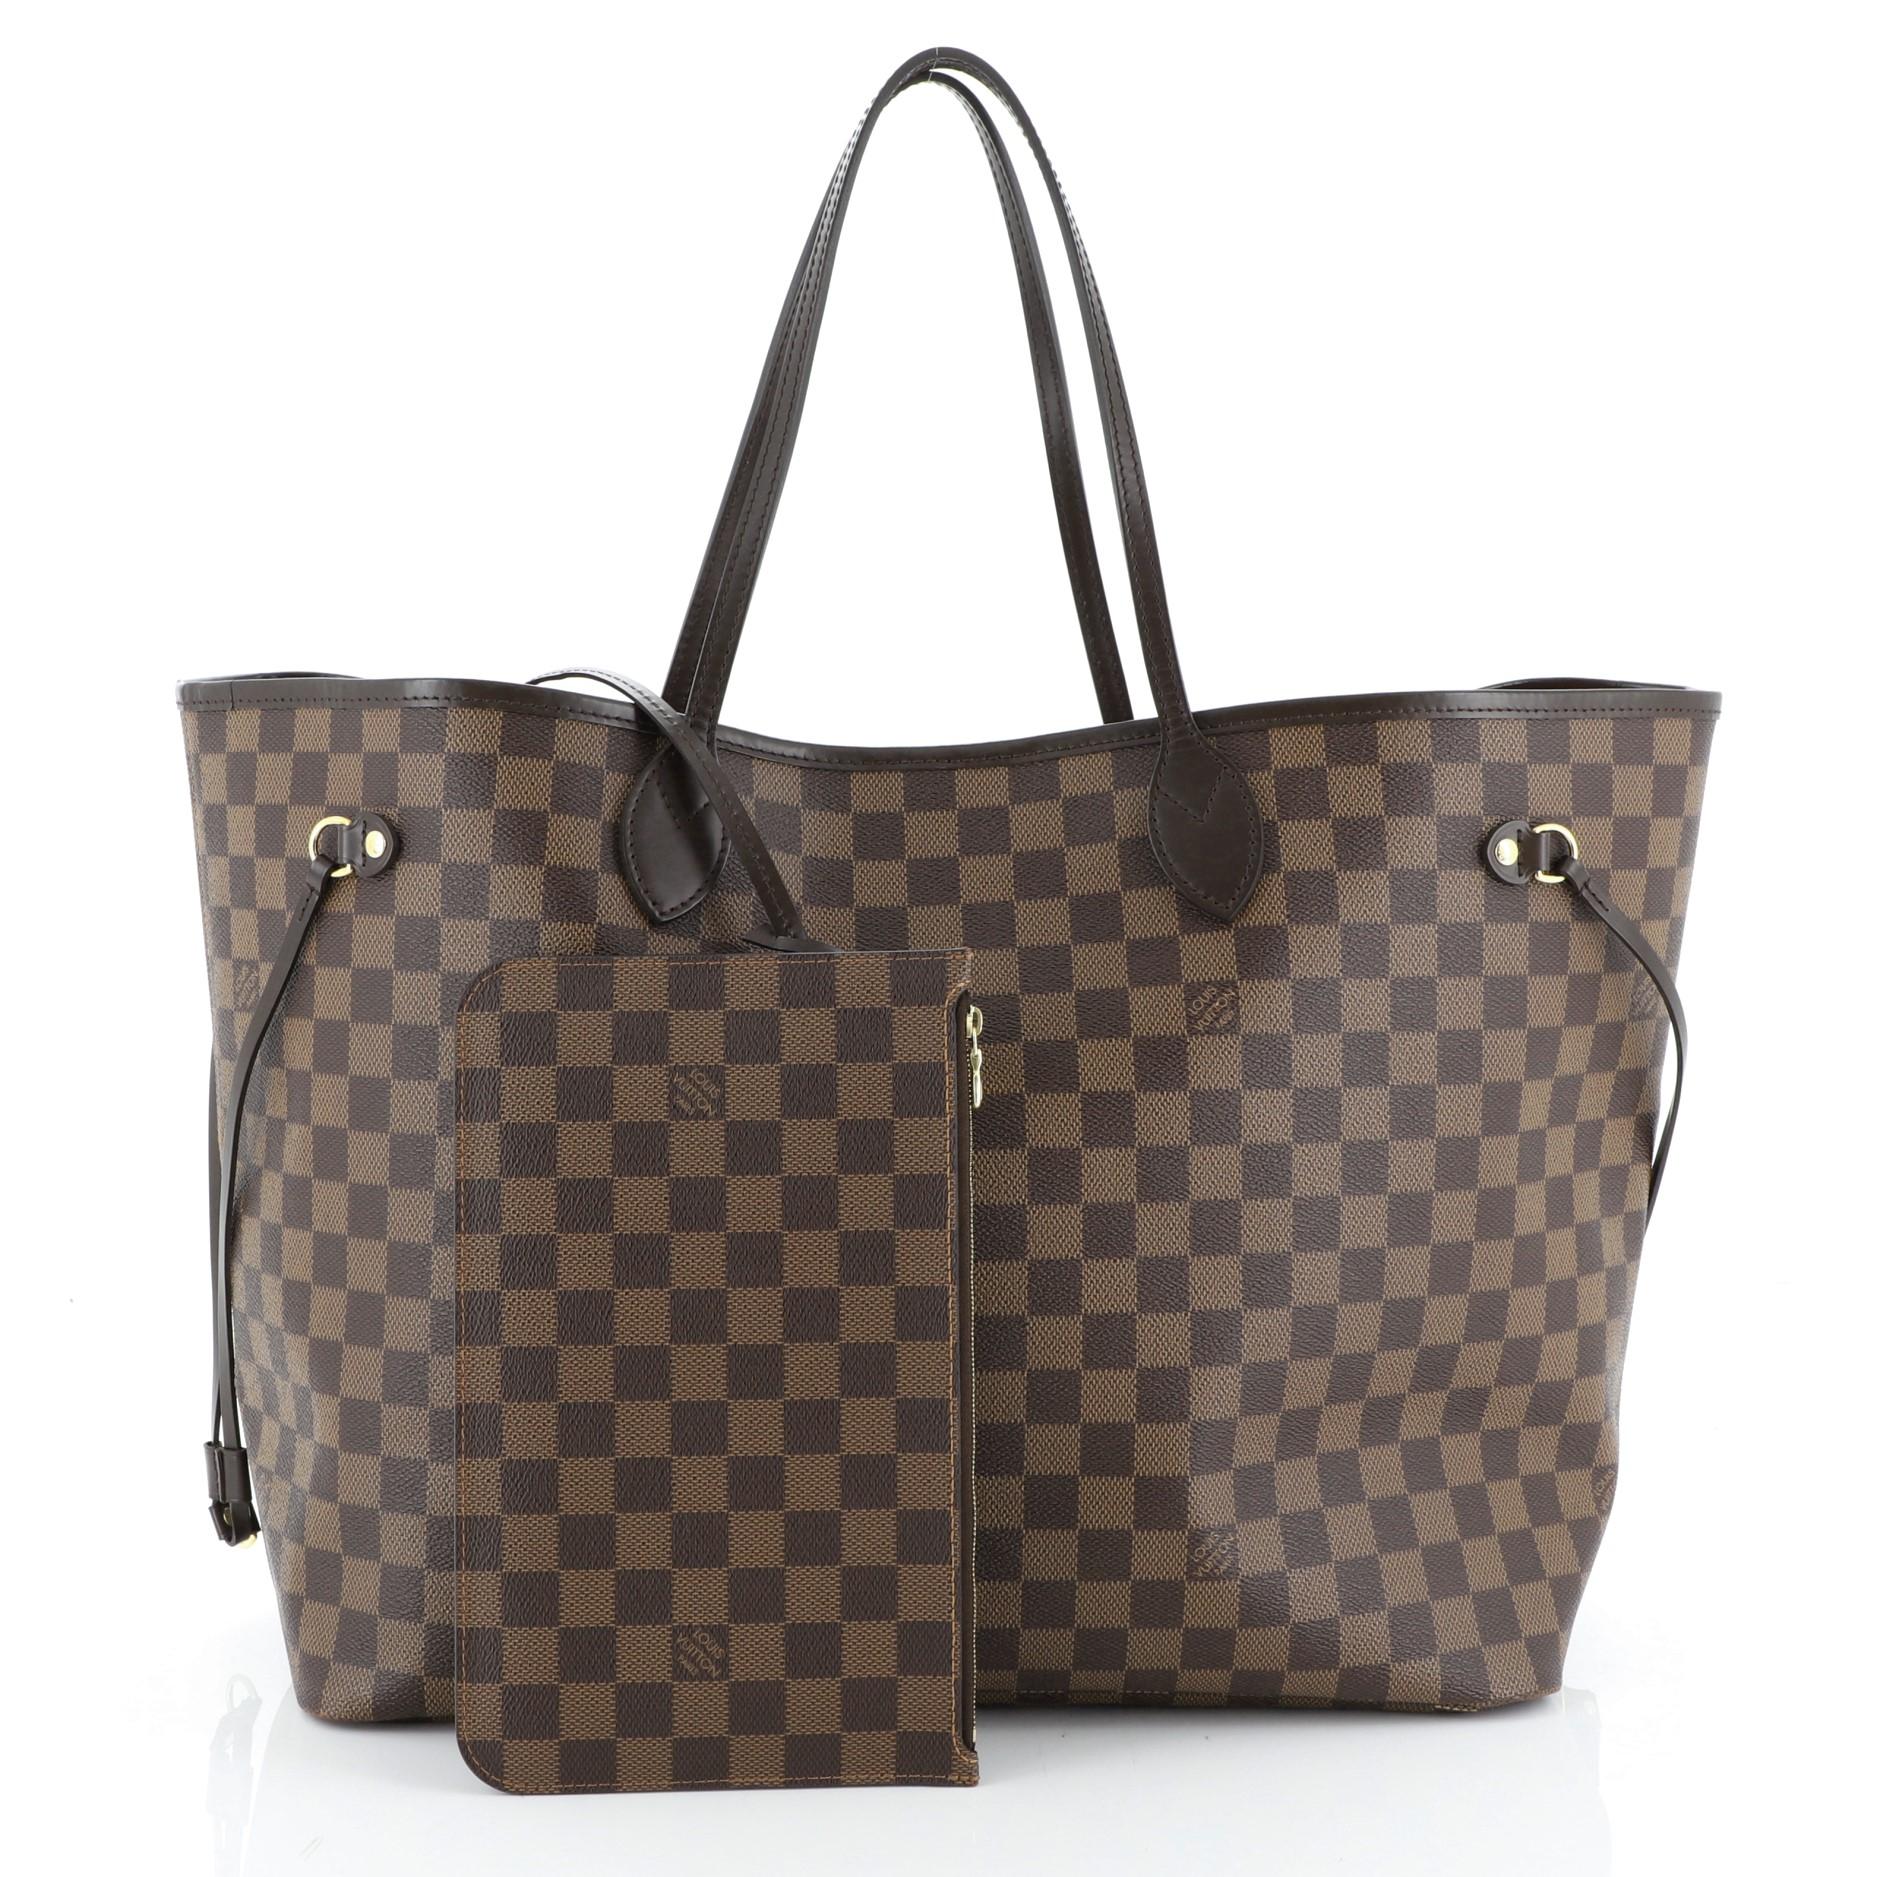 This Louis Vuitton Neverfull NM Tote Damier GM, crafted in damier ebene coated canvas, features dual slim handles, side laces, and gold-tone hardware. Its wide open top showcases a red fabric interior with side zip pocket. Authenticity code reads: